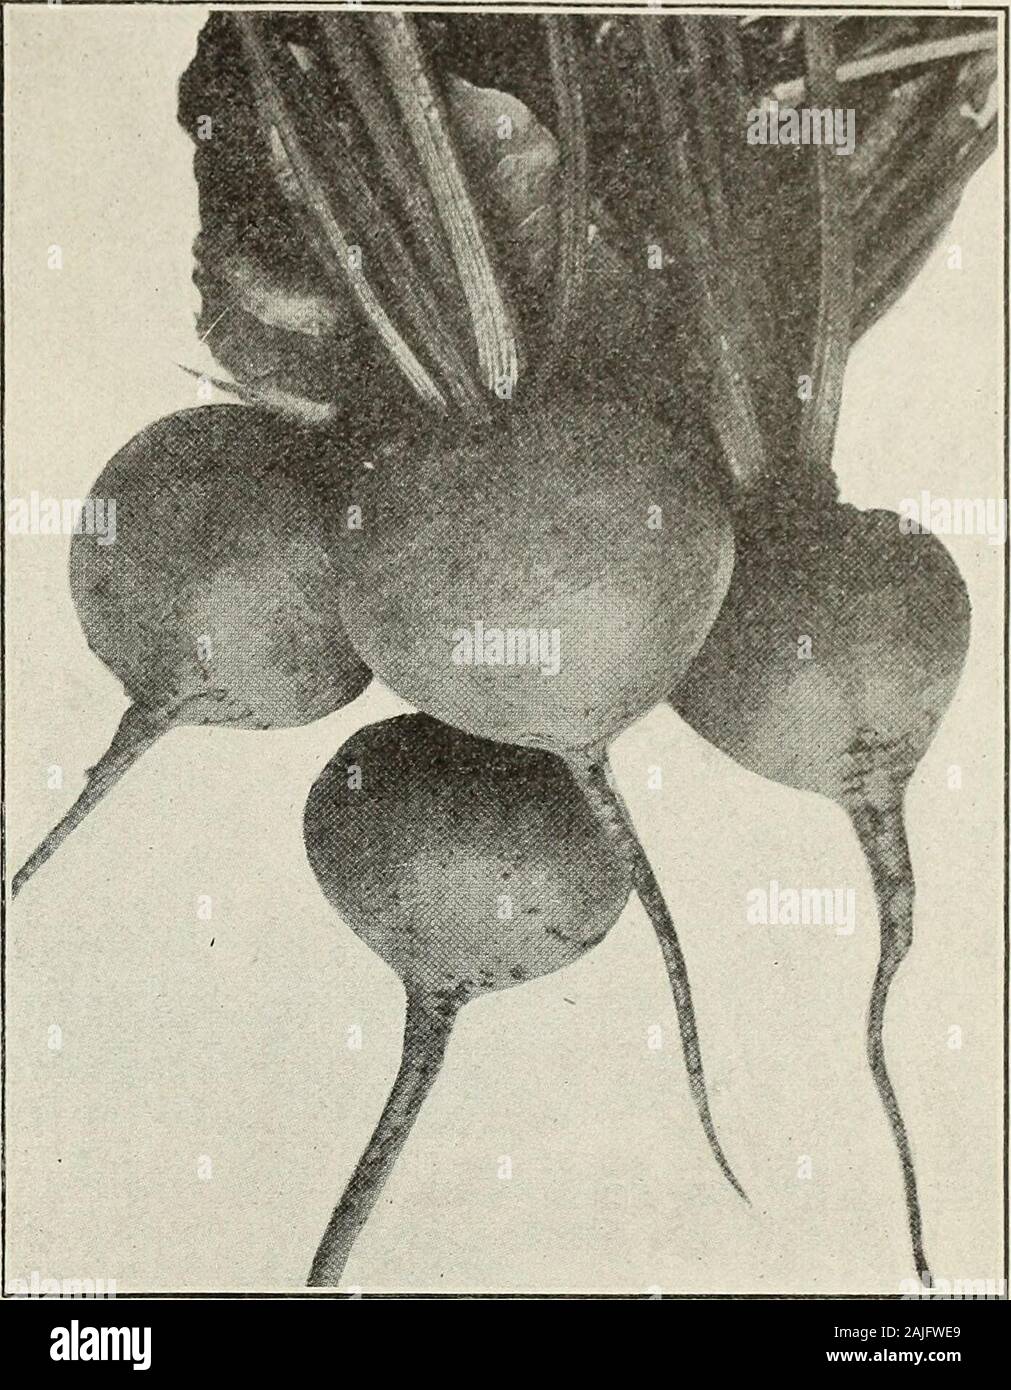 Schultz's seeds : 1913 . in the beets aspulled, but after they have been cooked.They are also more spherical than the extraearly flat Egyptian, and I know of no betterquality. One of the best for planting earlyout of doors. It becomes fit for use soonerthan anr other variety, and is equally suitedfor forcing in hot beds or for transplanting.Price, packet, 5c; oz., 10c; Y lb., 35c; lb.,$1.00. Extra Early Eclipse Very earl&gt;r- h*nf J r some, smooth, dark,round-shaped Beet. Small top and of ex-cellent table qualities. Makes an attractiveseller in market. Packet, 5c; oz., 10c; Yalb., 30c; lb., Stock Photo